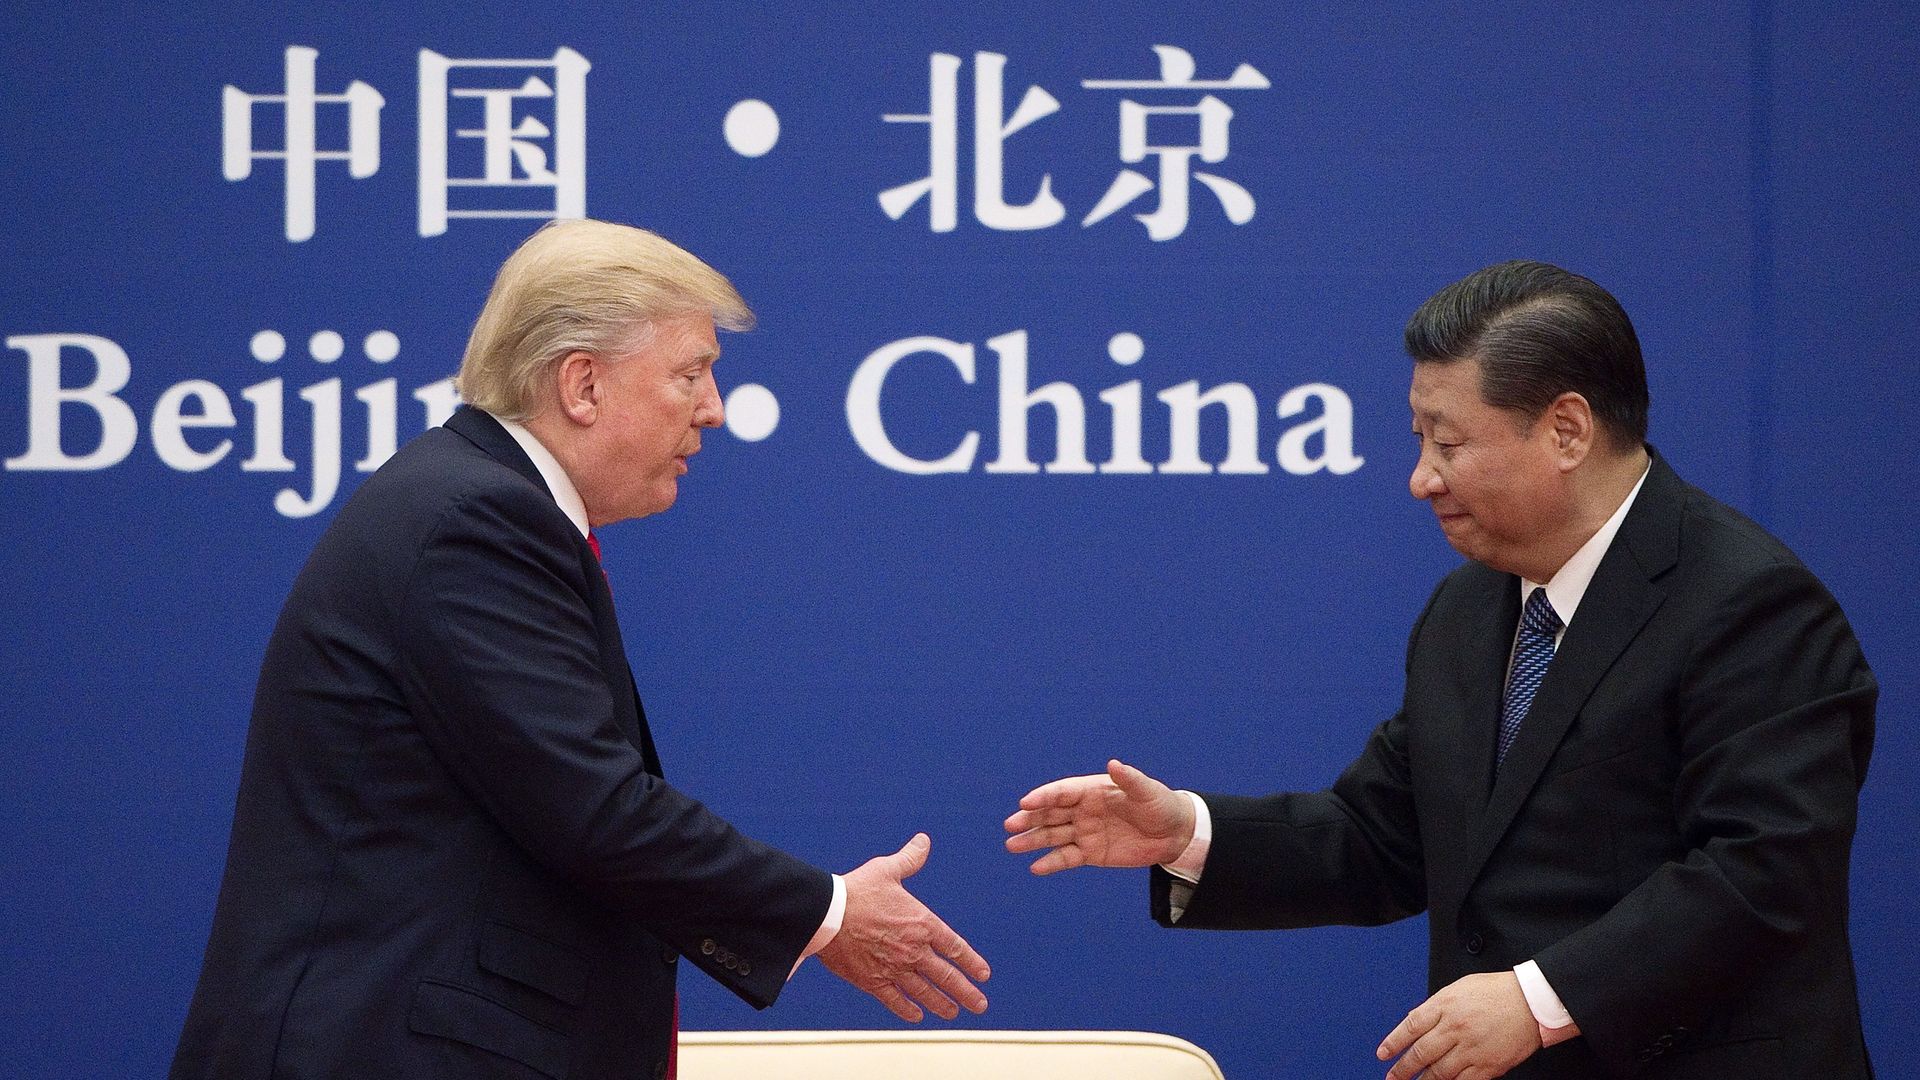 Trump and China's president Xi